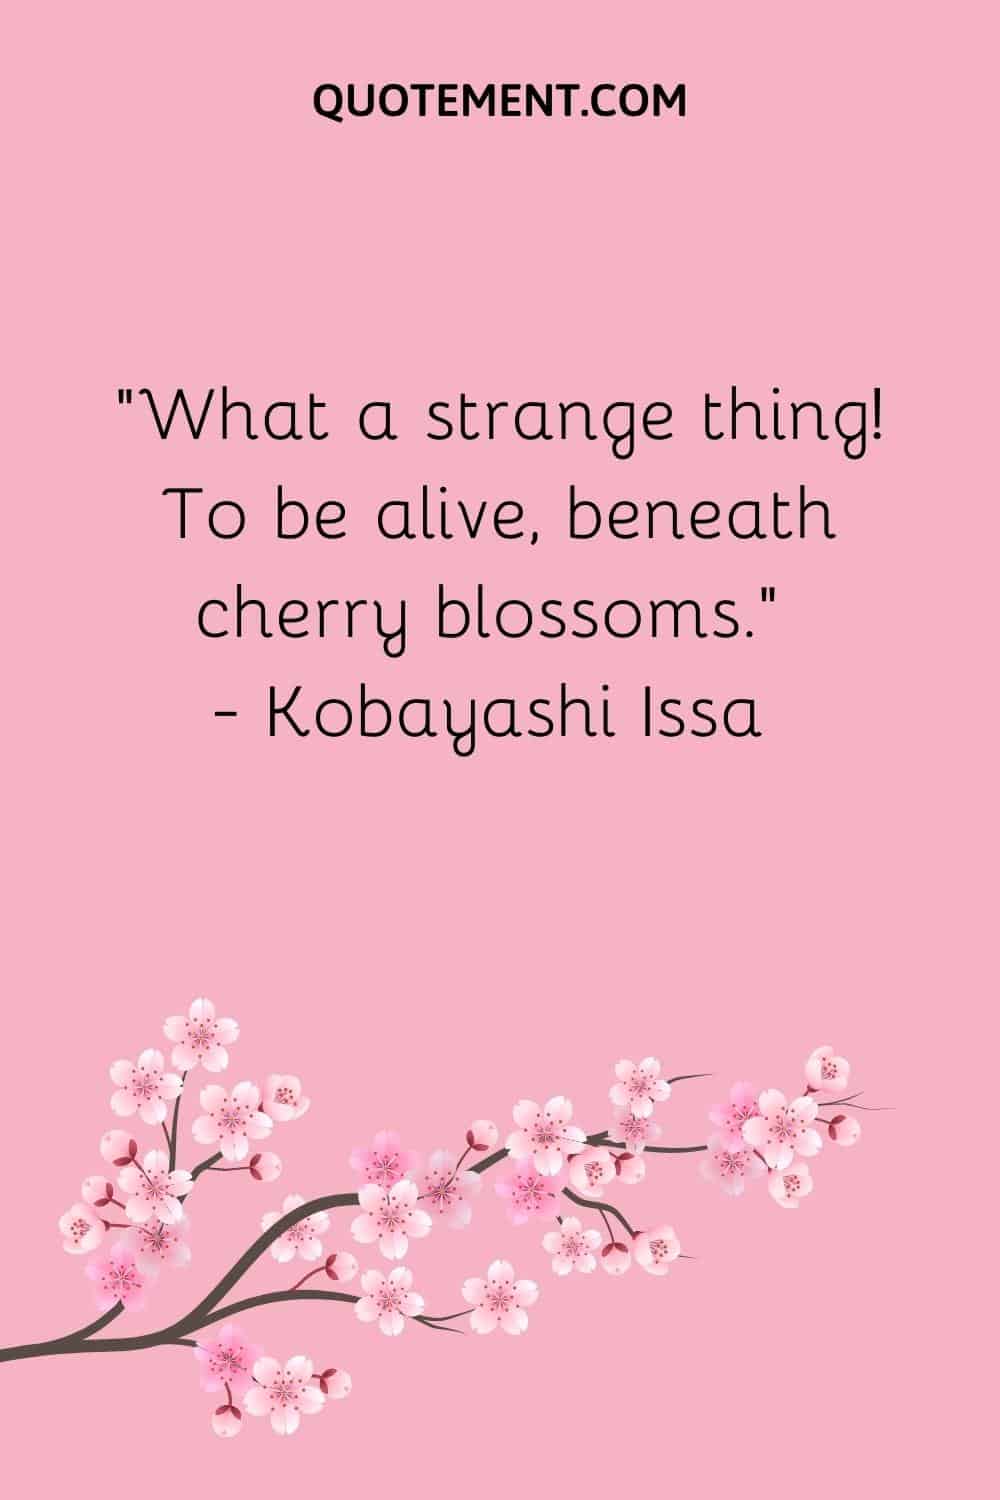 “What a strange thing! To be alive, beneath cherry blossoms.” — Kobayashi Issa